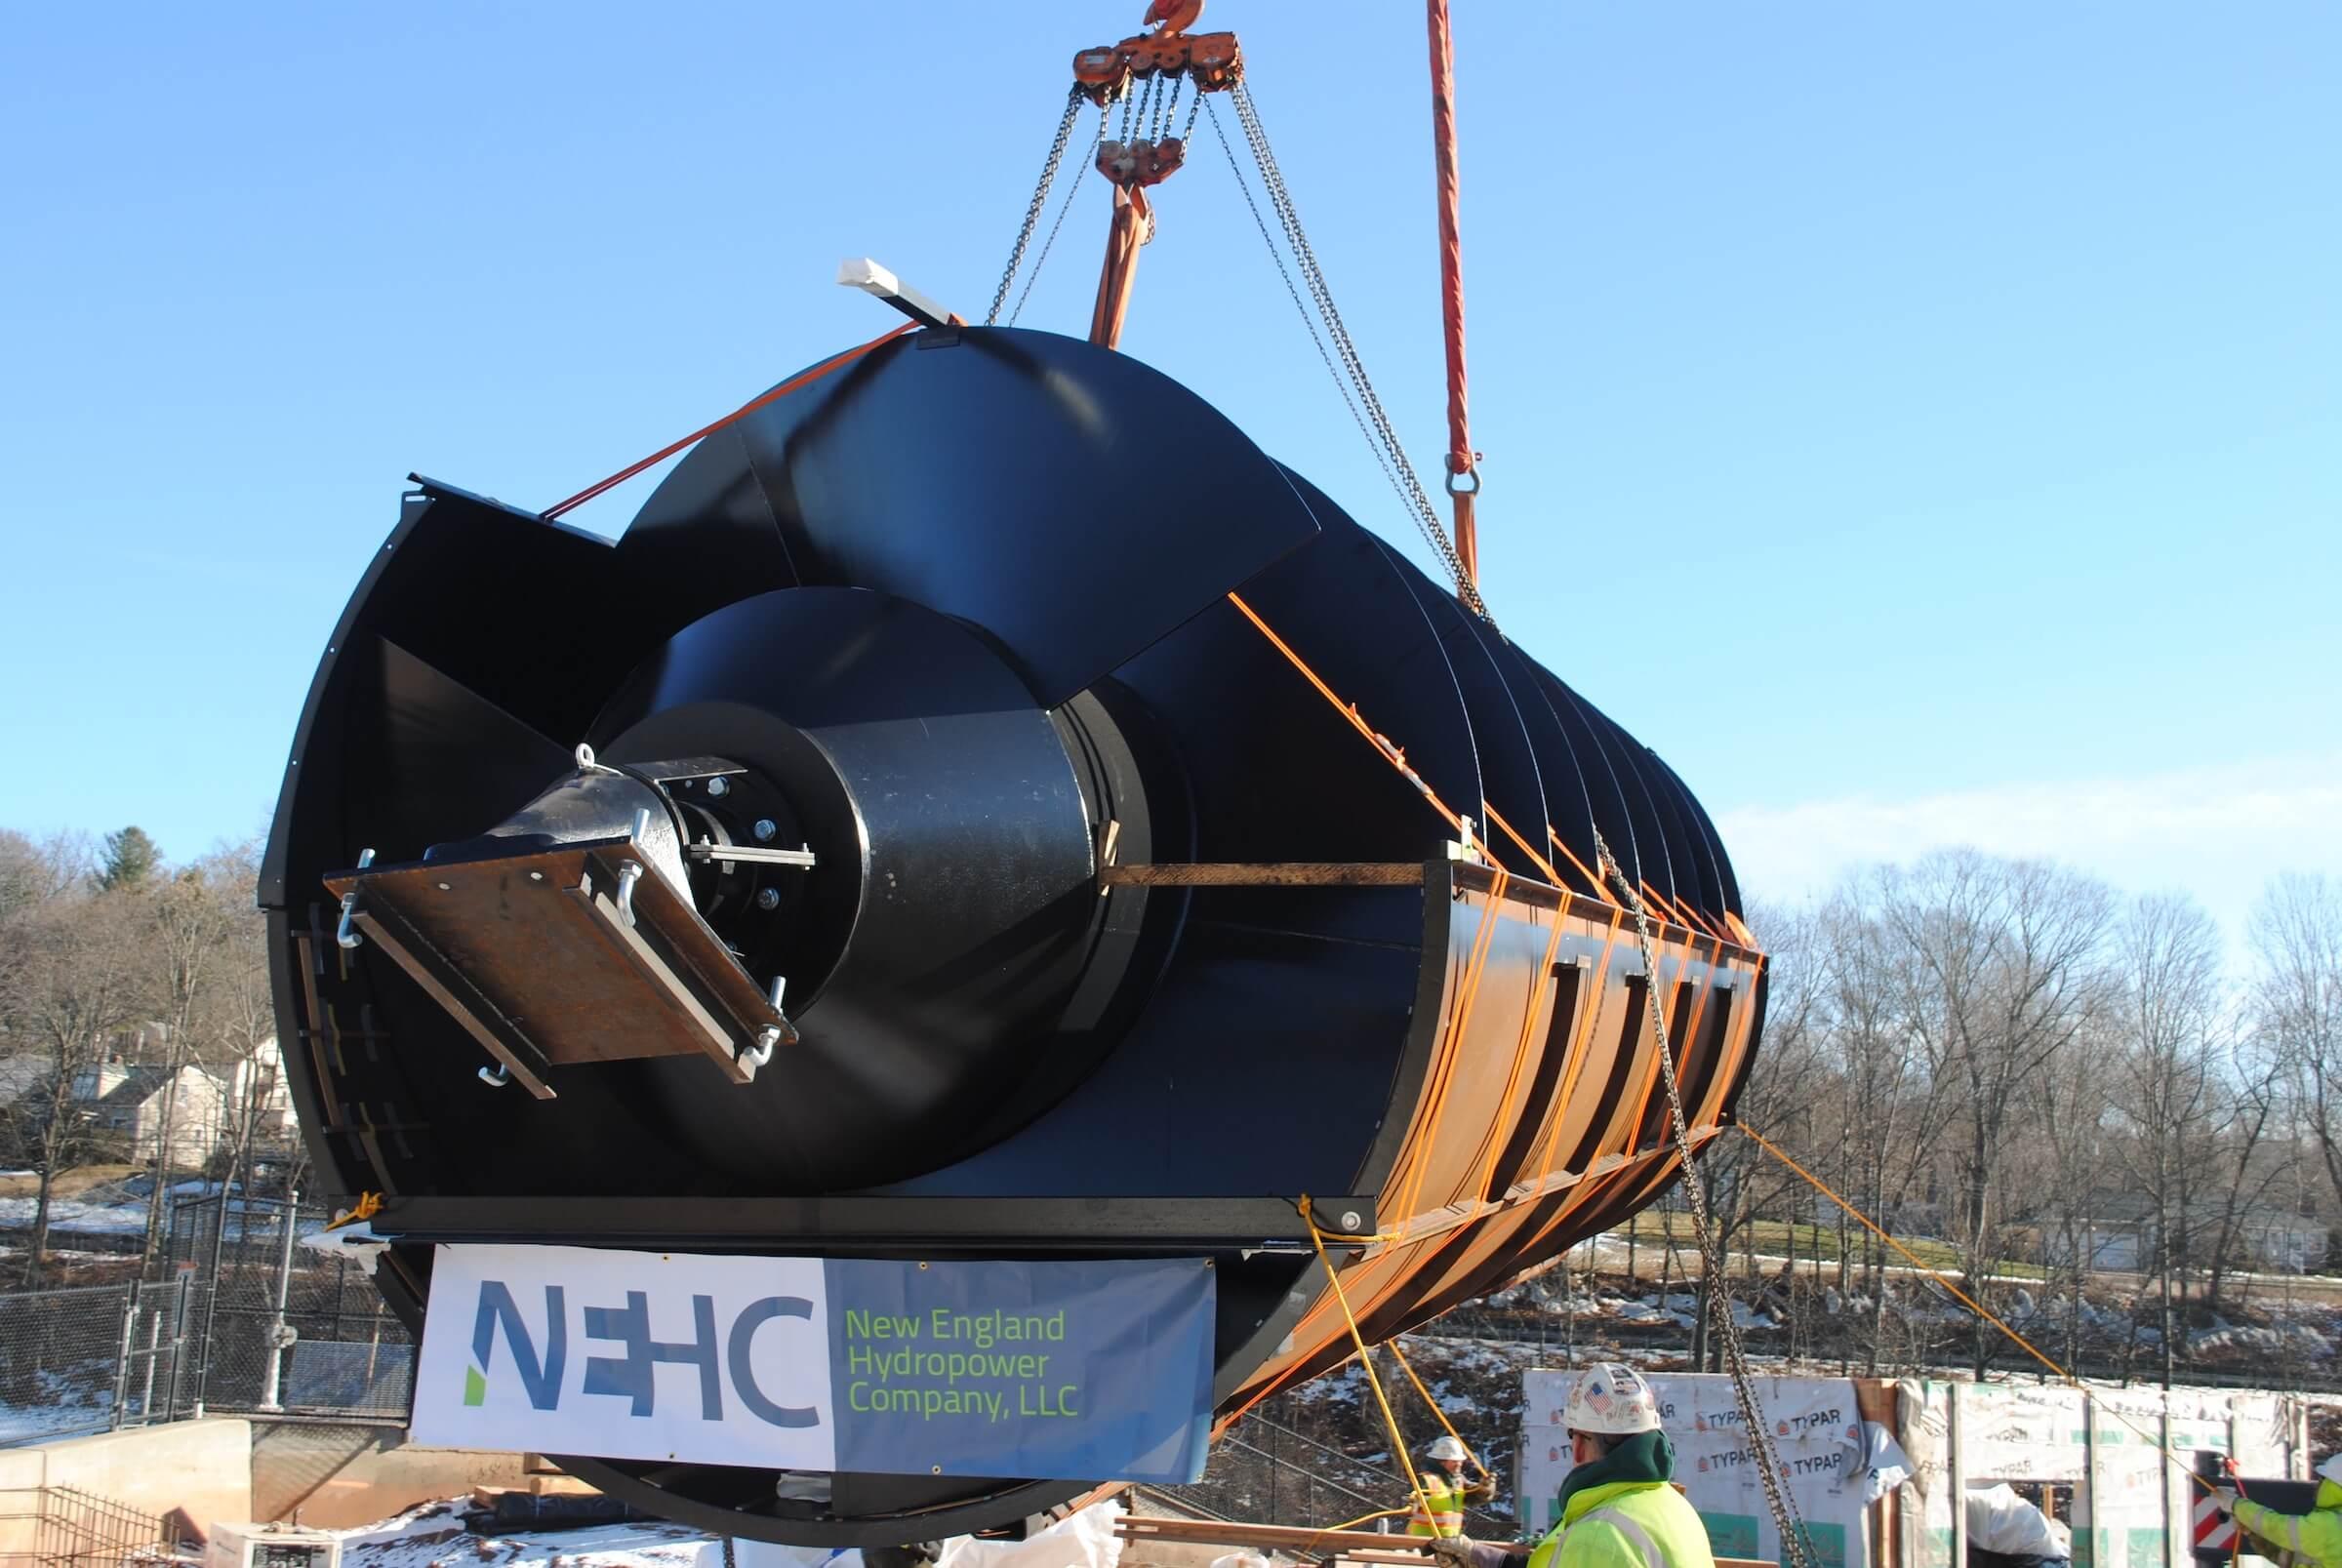 Product Technology | New England Hydropower Company image